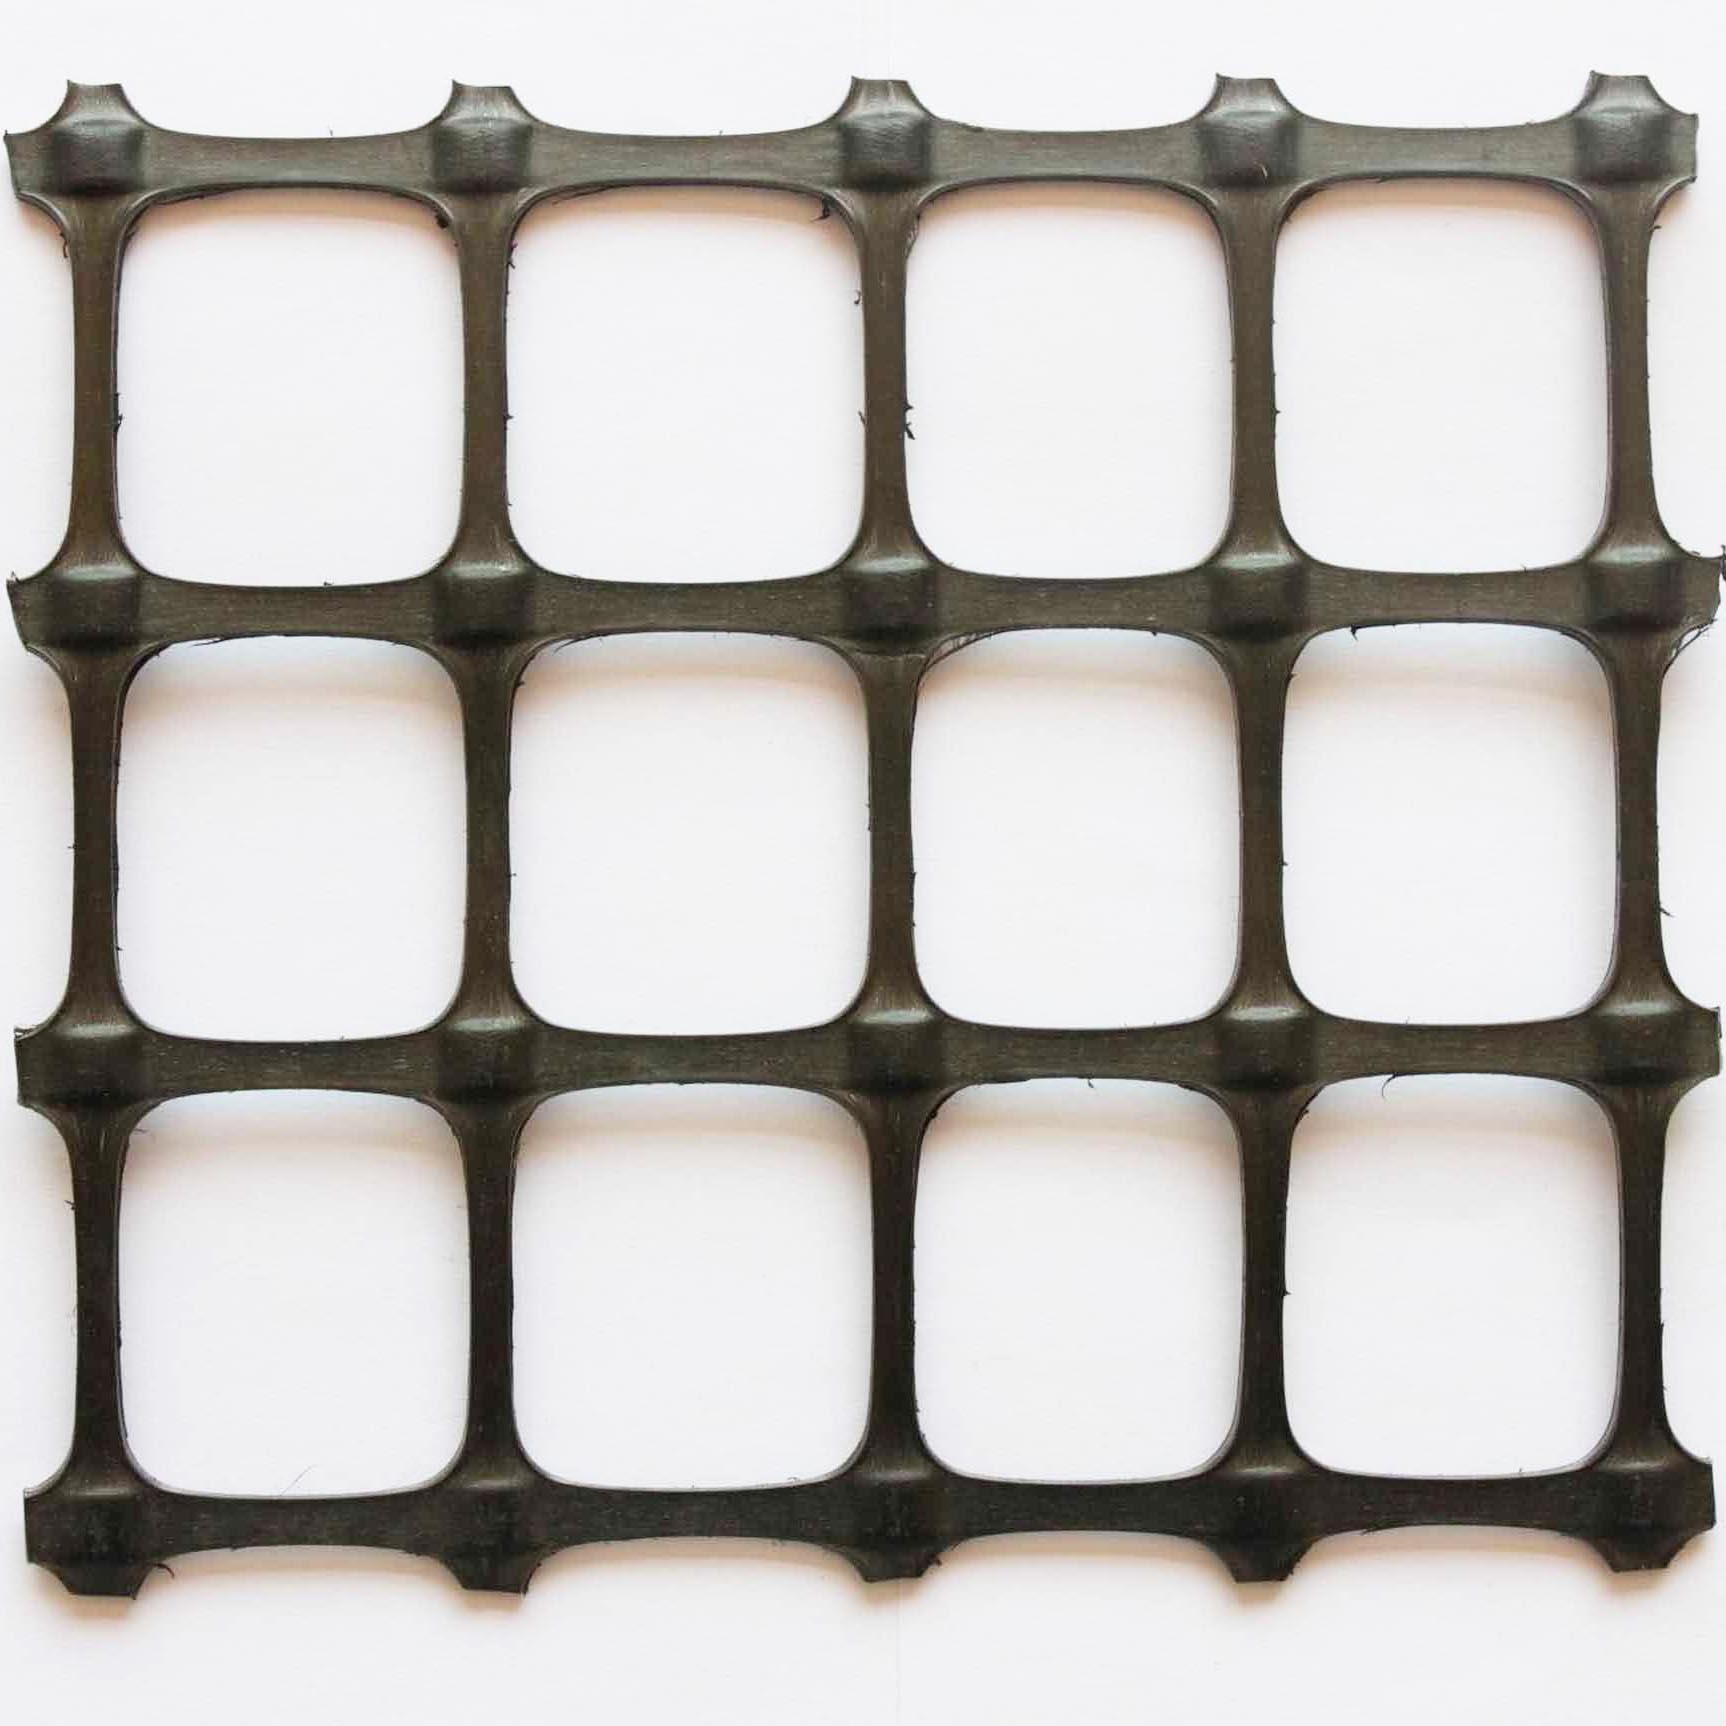 High Strength Biaxial Plastic Geogrid Featured Image